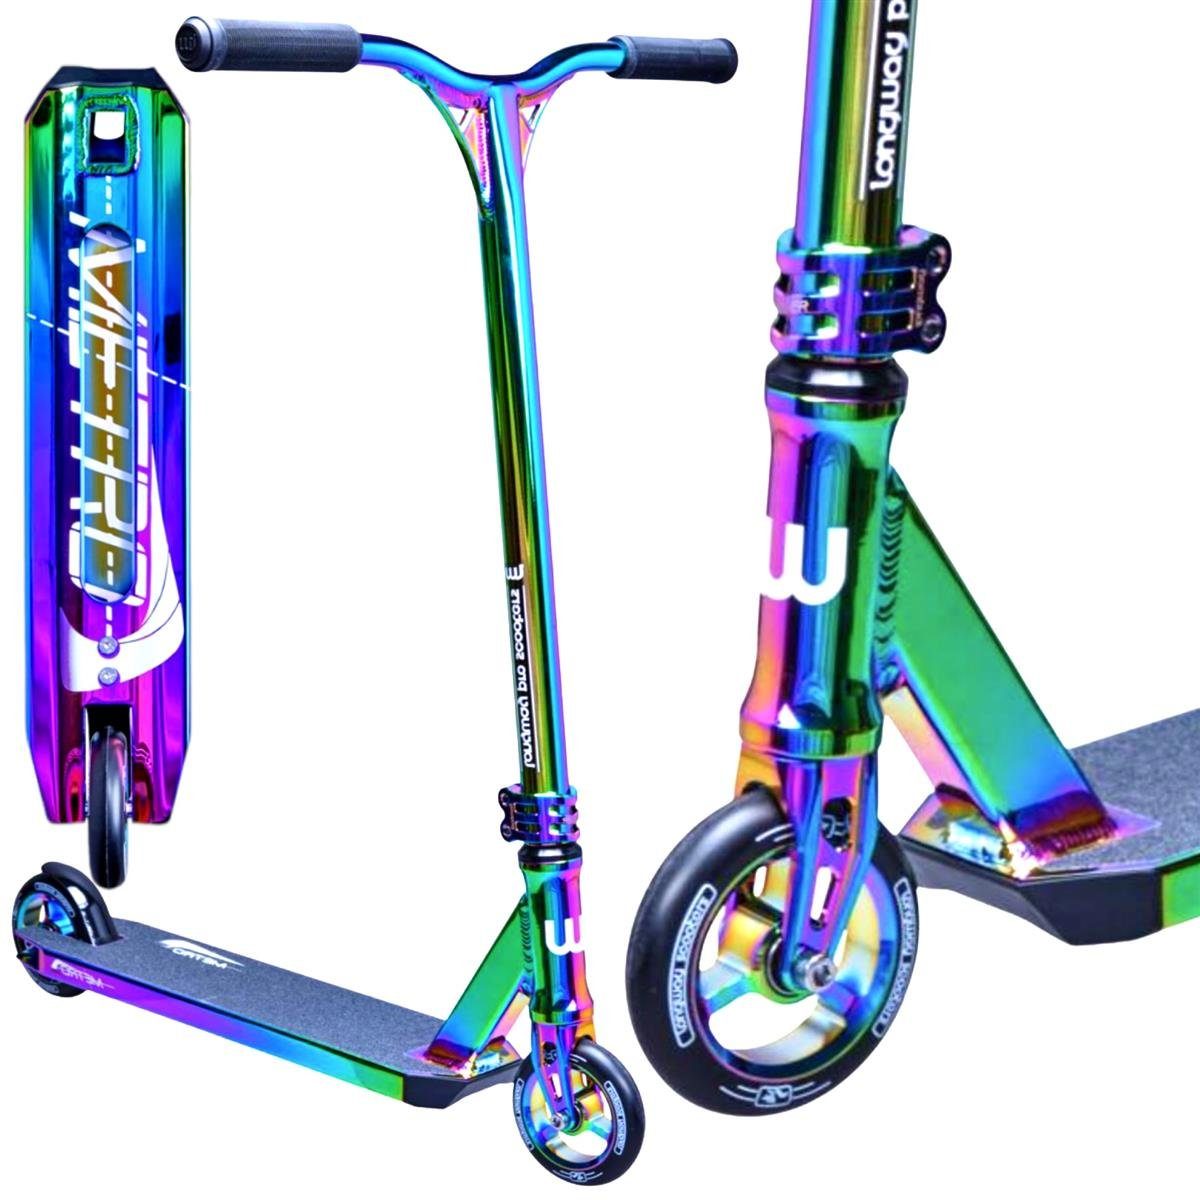 Longway Scooters Stuntscooter Longway Metro 2K19 Stunt-Scooter H=79cm Full Neochrom